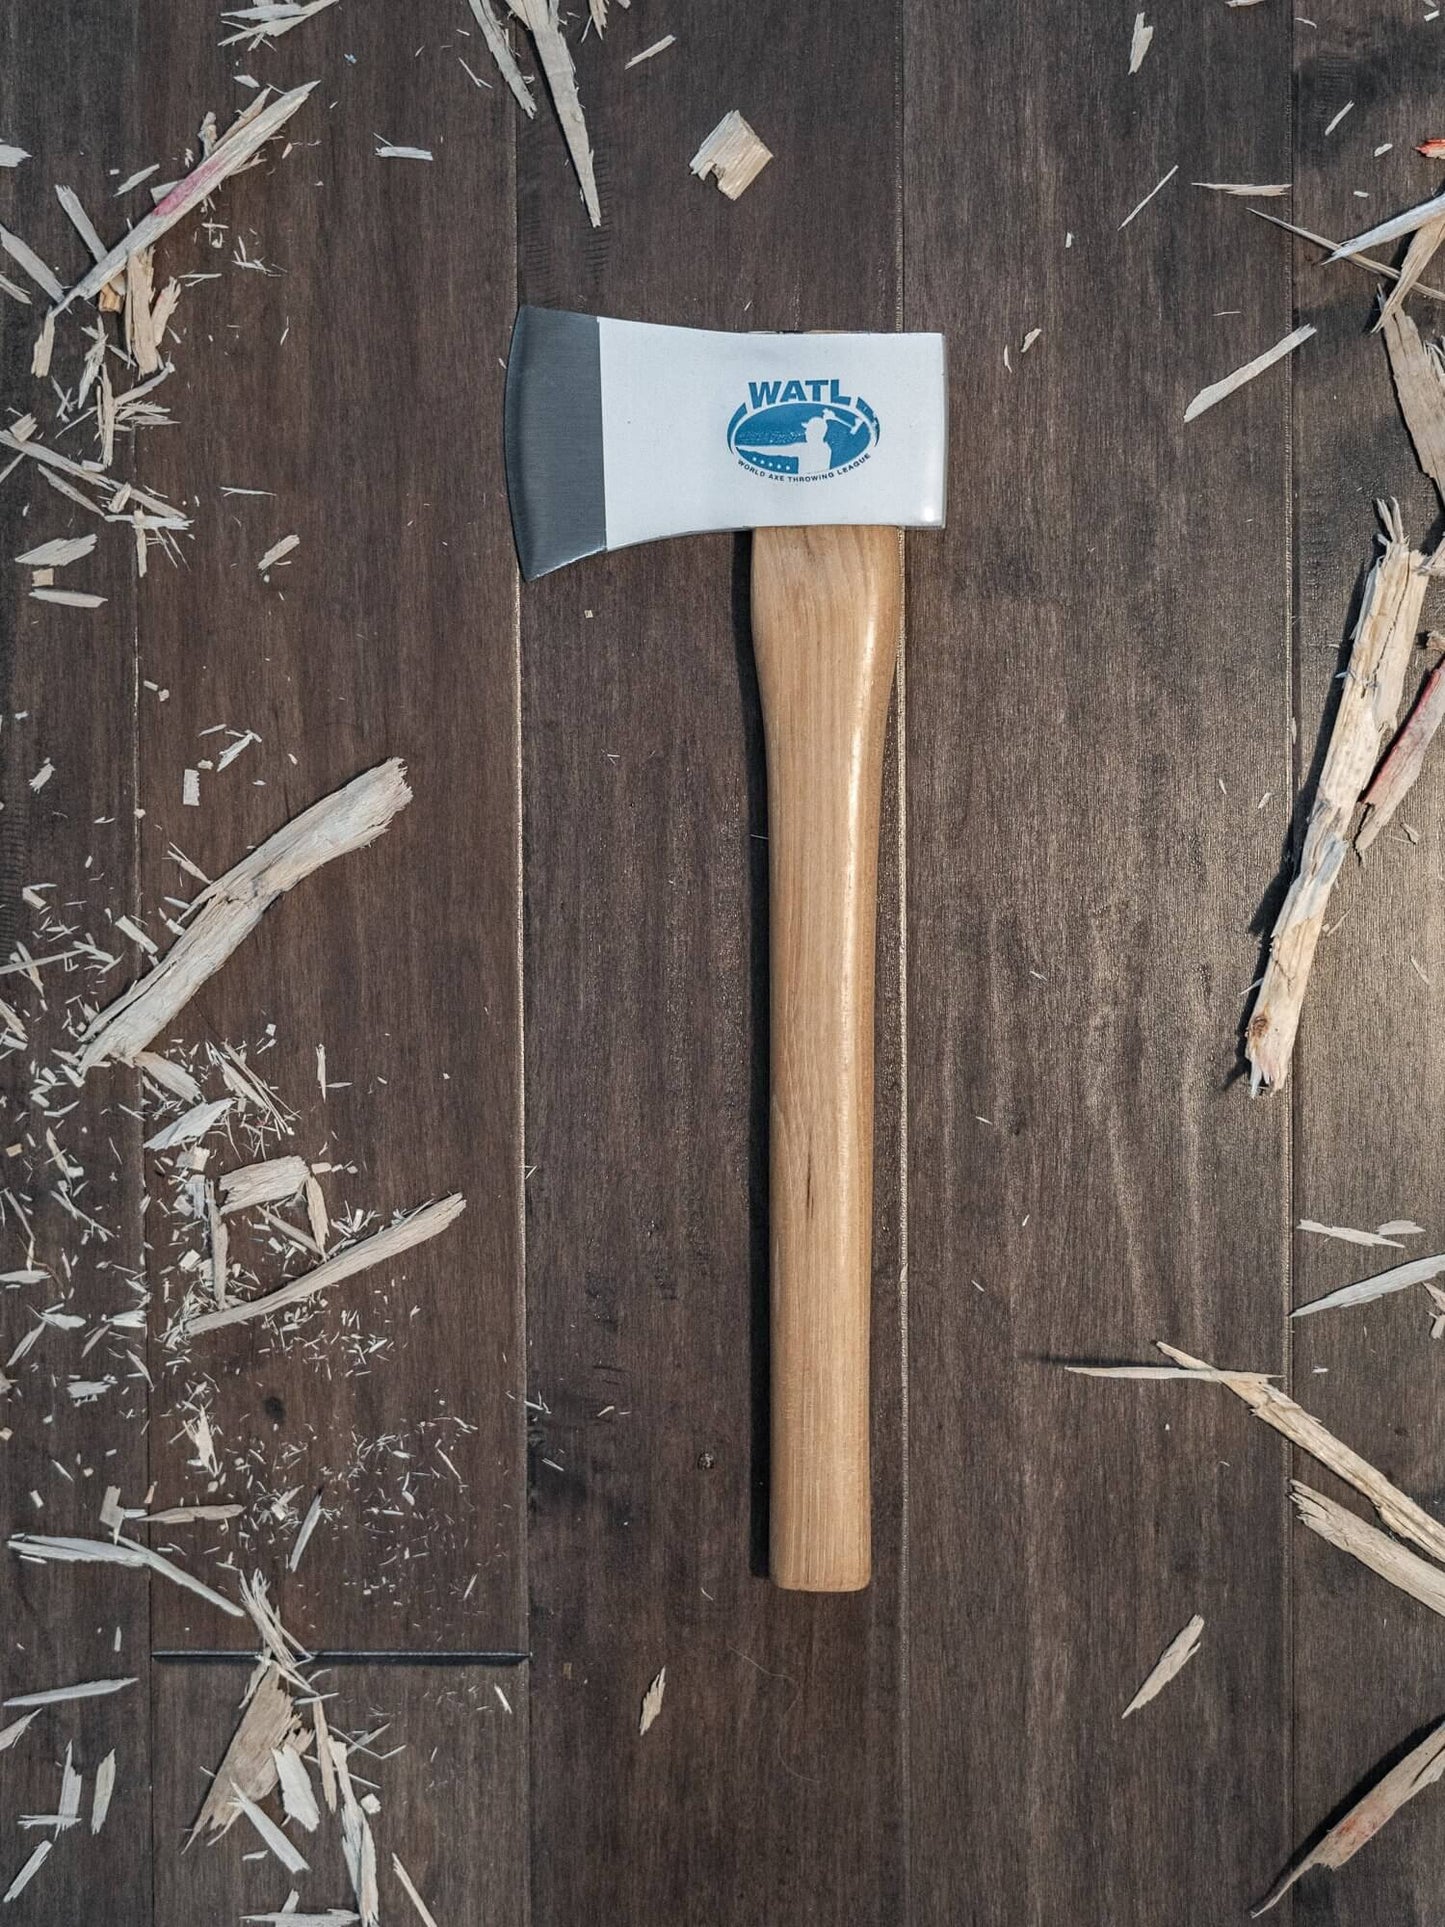 Axe Throwing Venue Starter Kit Competition Thrower